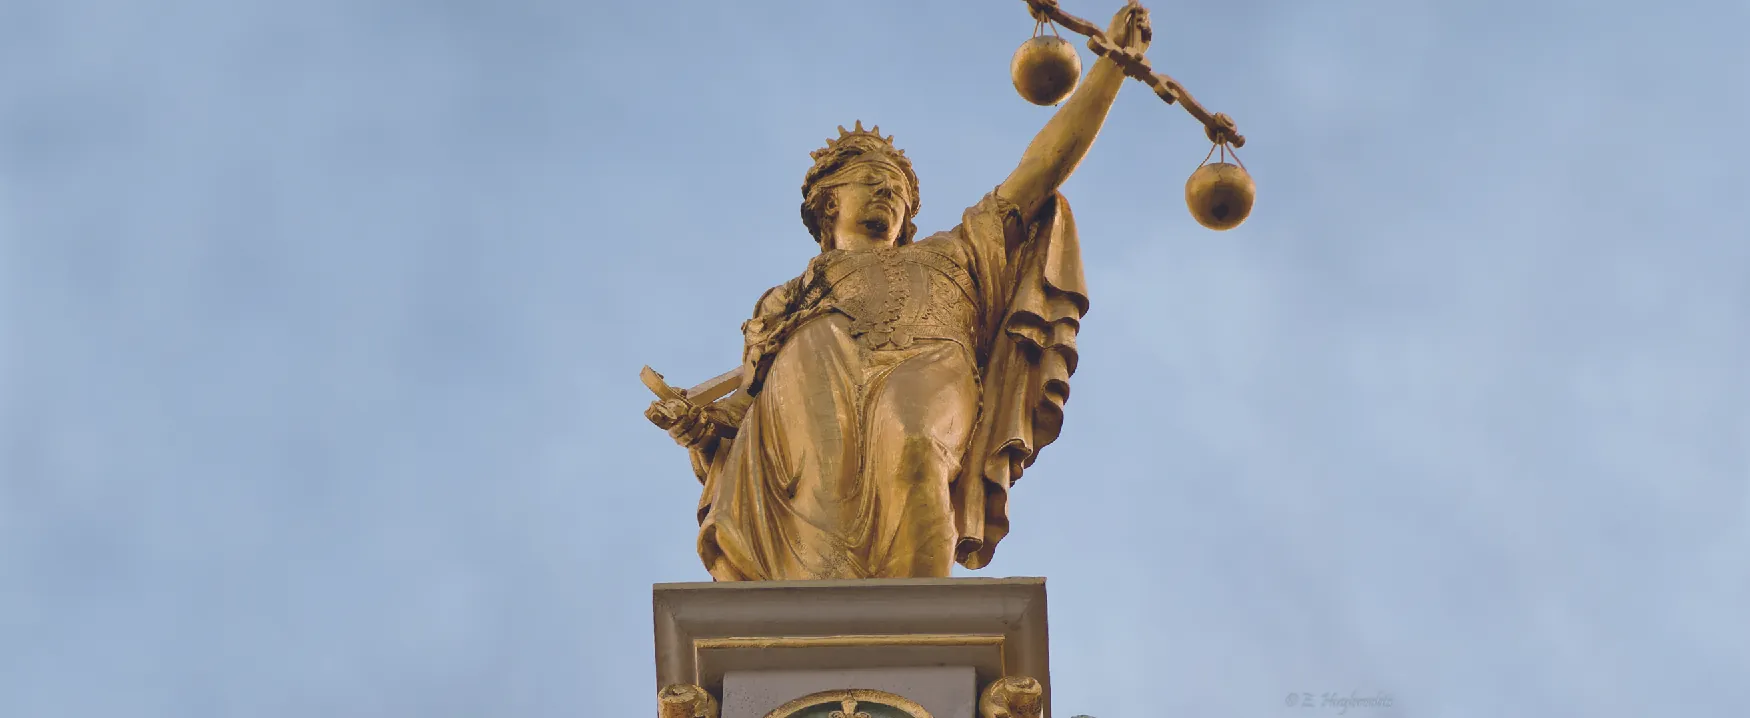 A photo of a statue depicting the figure of Justice.